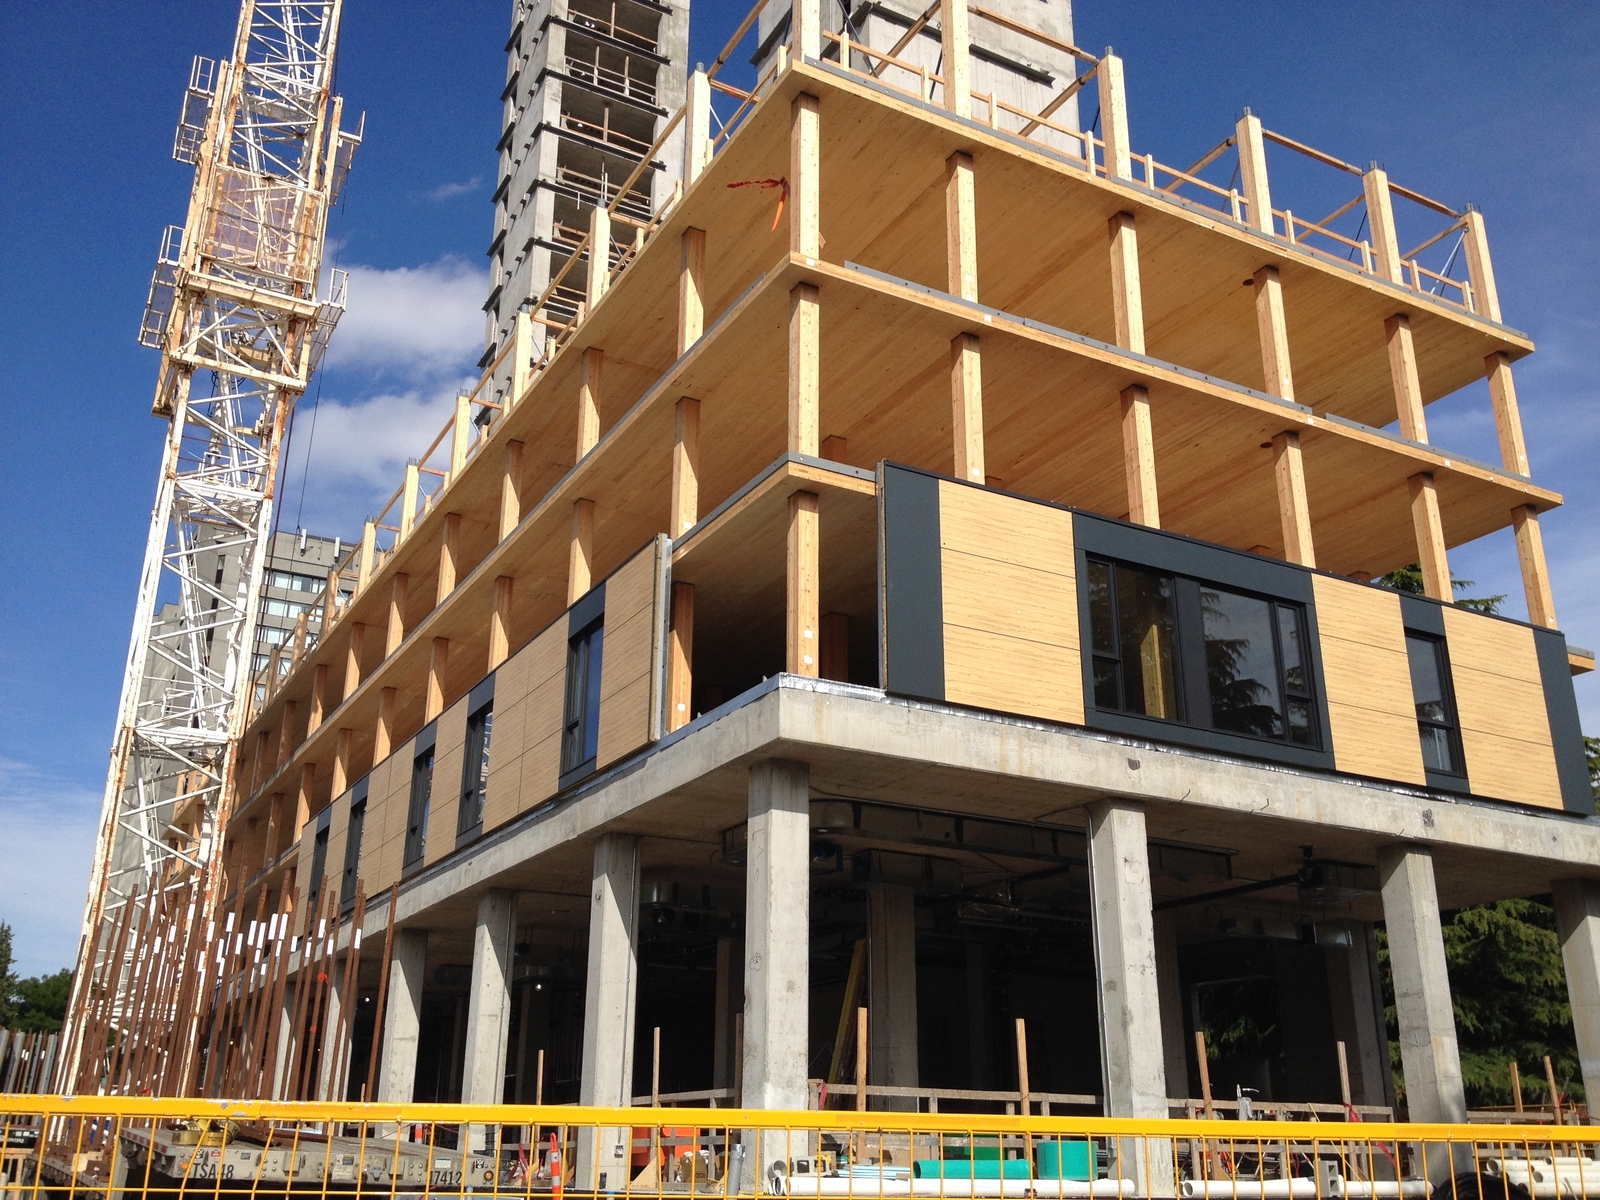 Prefabricated Wood Hybrid Panels shown partially installed in this daytime upward exterior photo of the mid construction Brock Commons Tallwood House